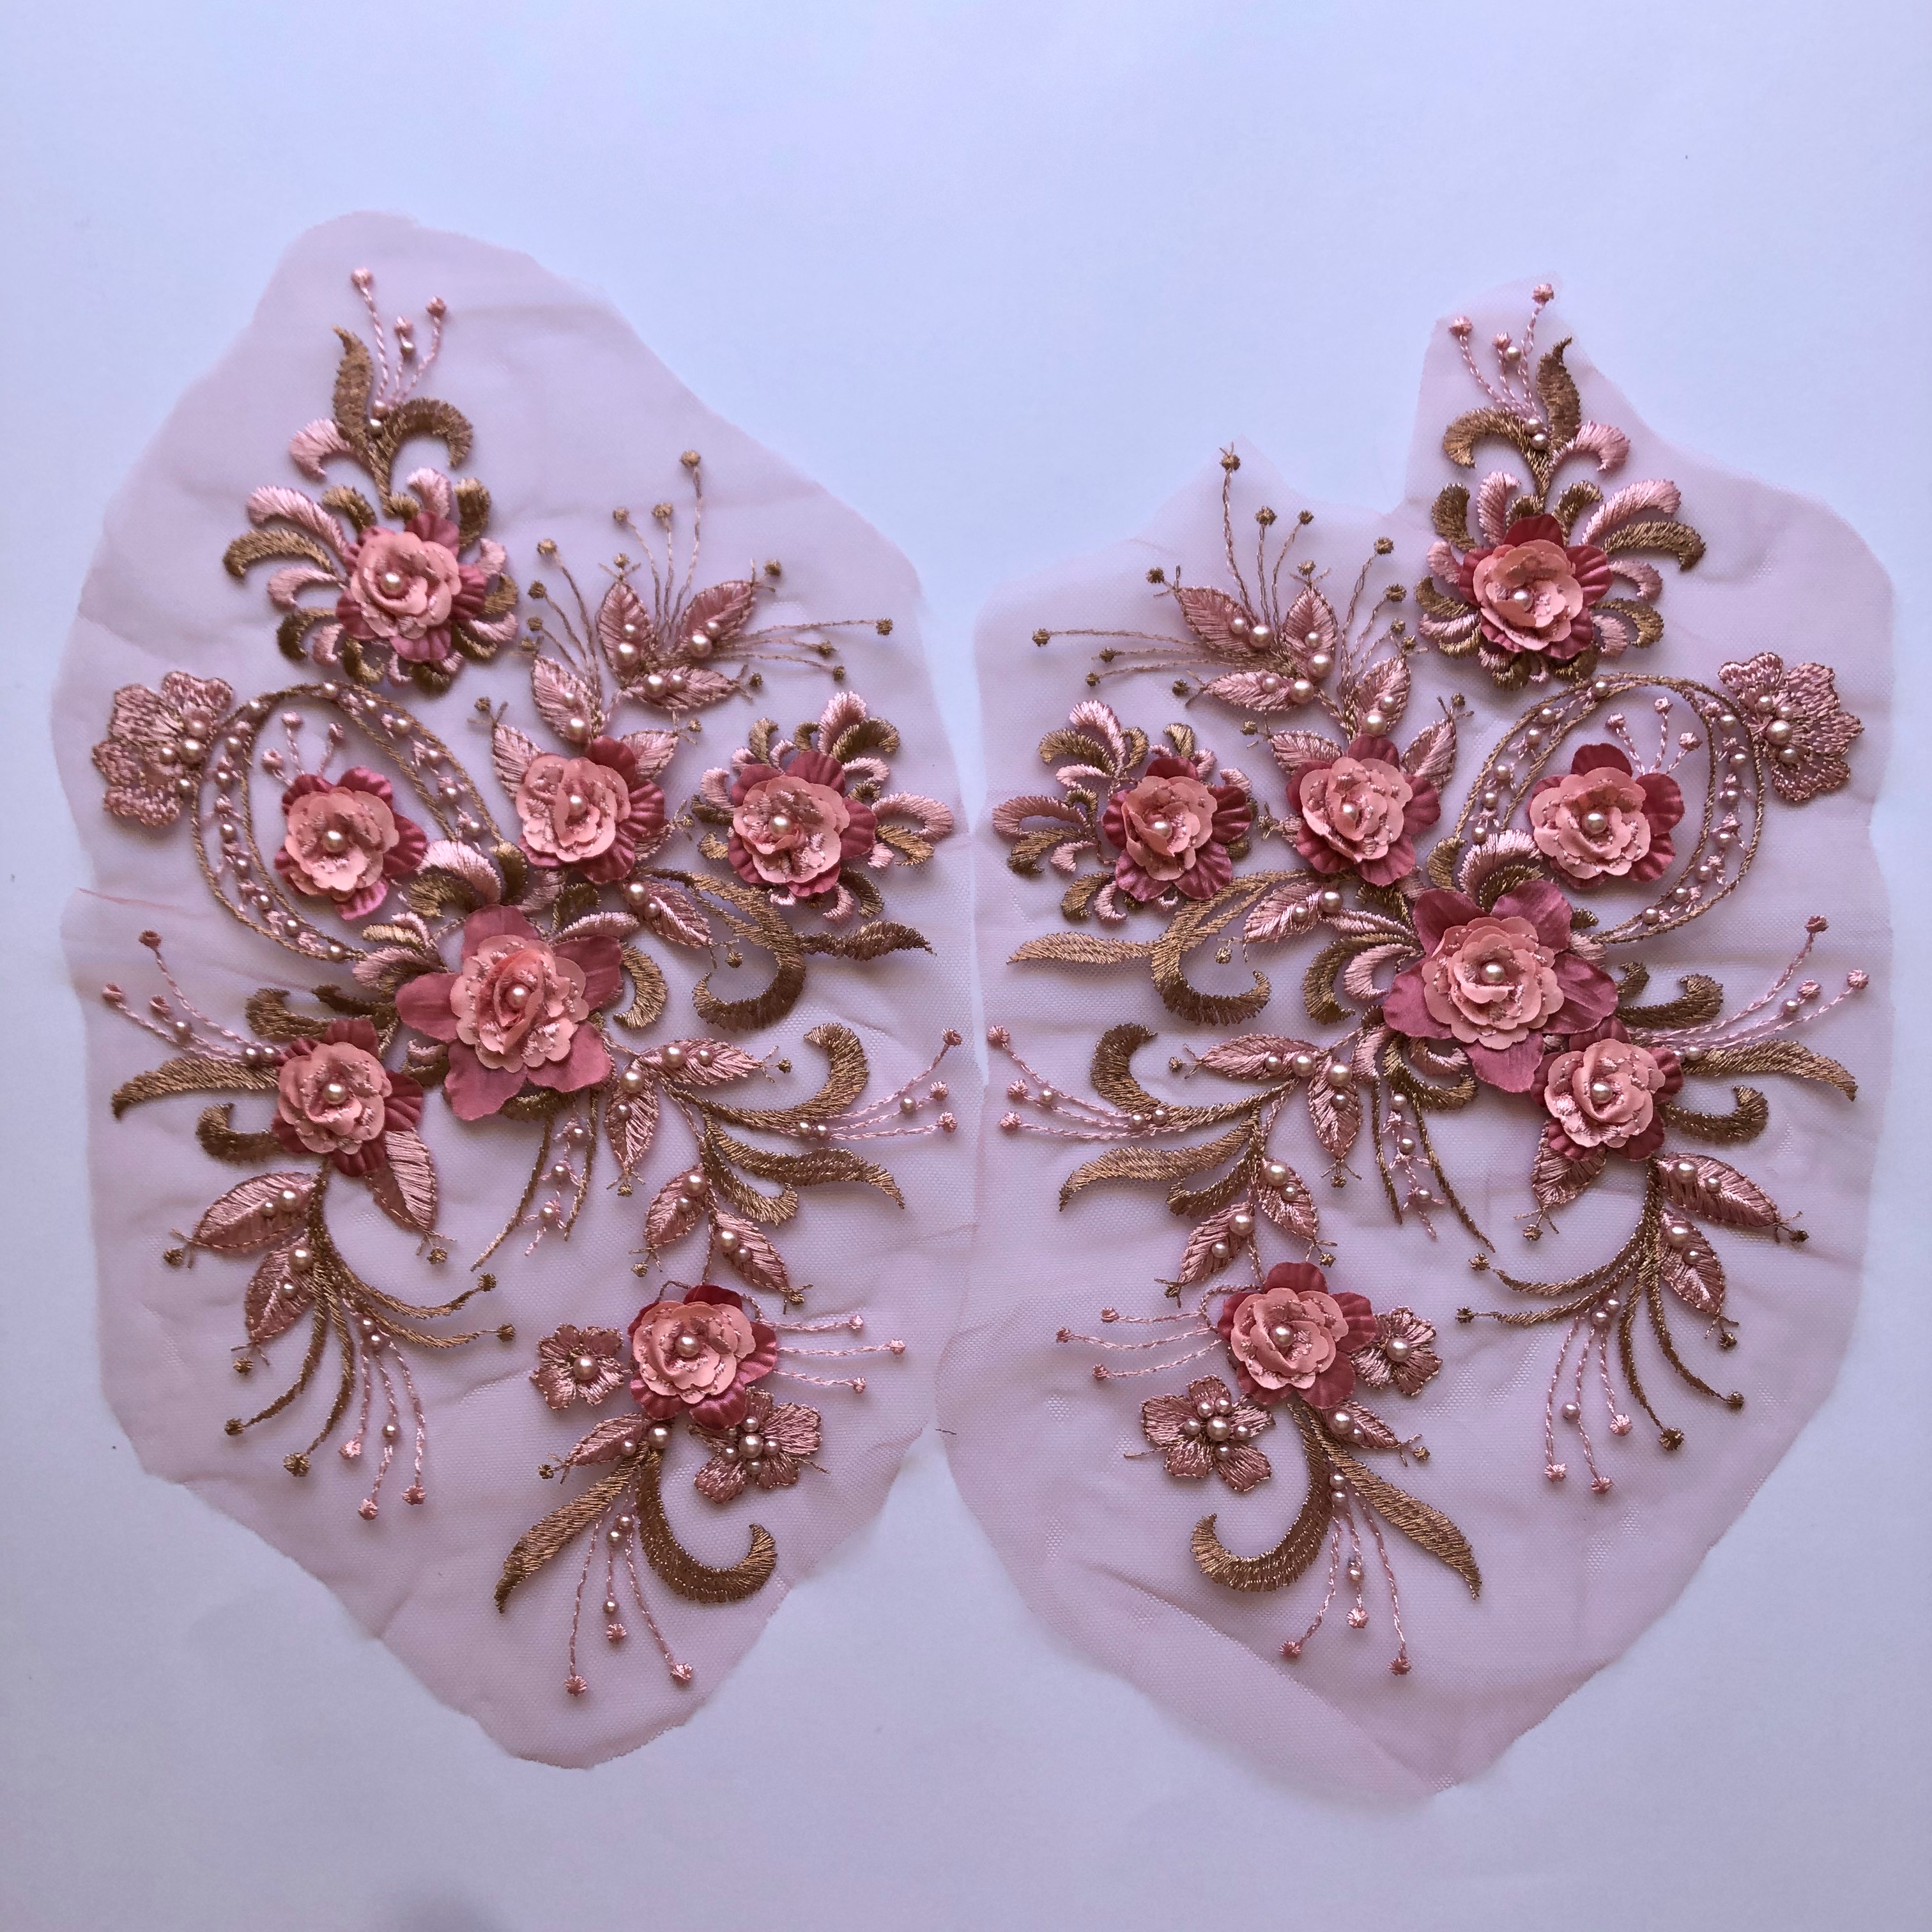 Mirrored pair applique with 7 pink layered flowers and a background of pink and pale bronze metallic leaves.. Embroidered onto a thin net.